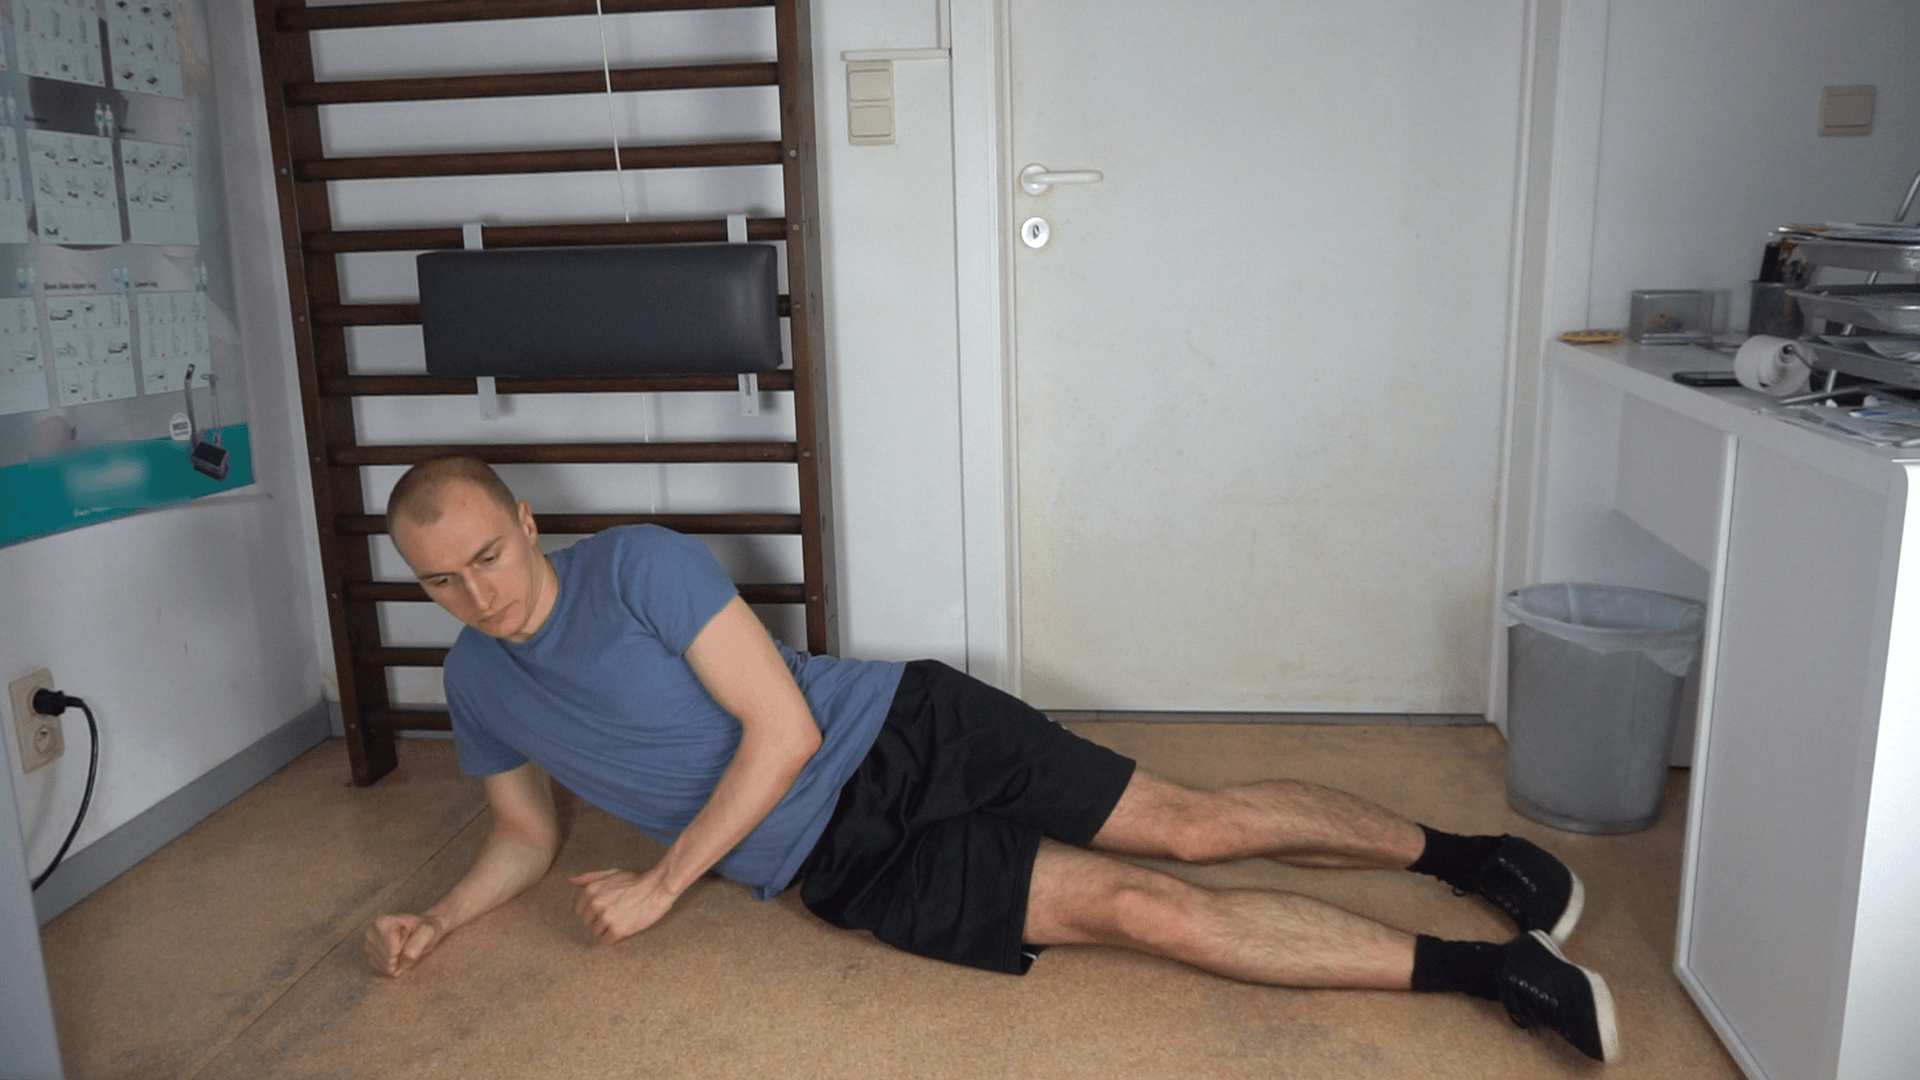 How to do an adductor side plank